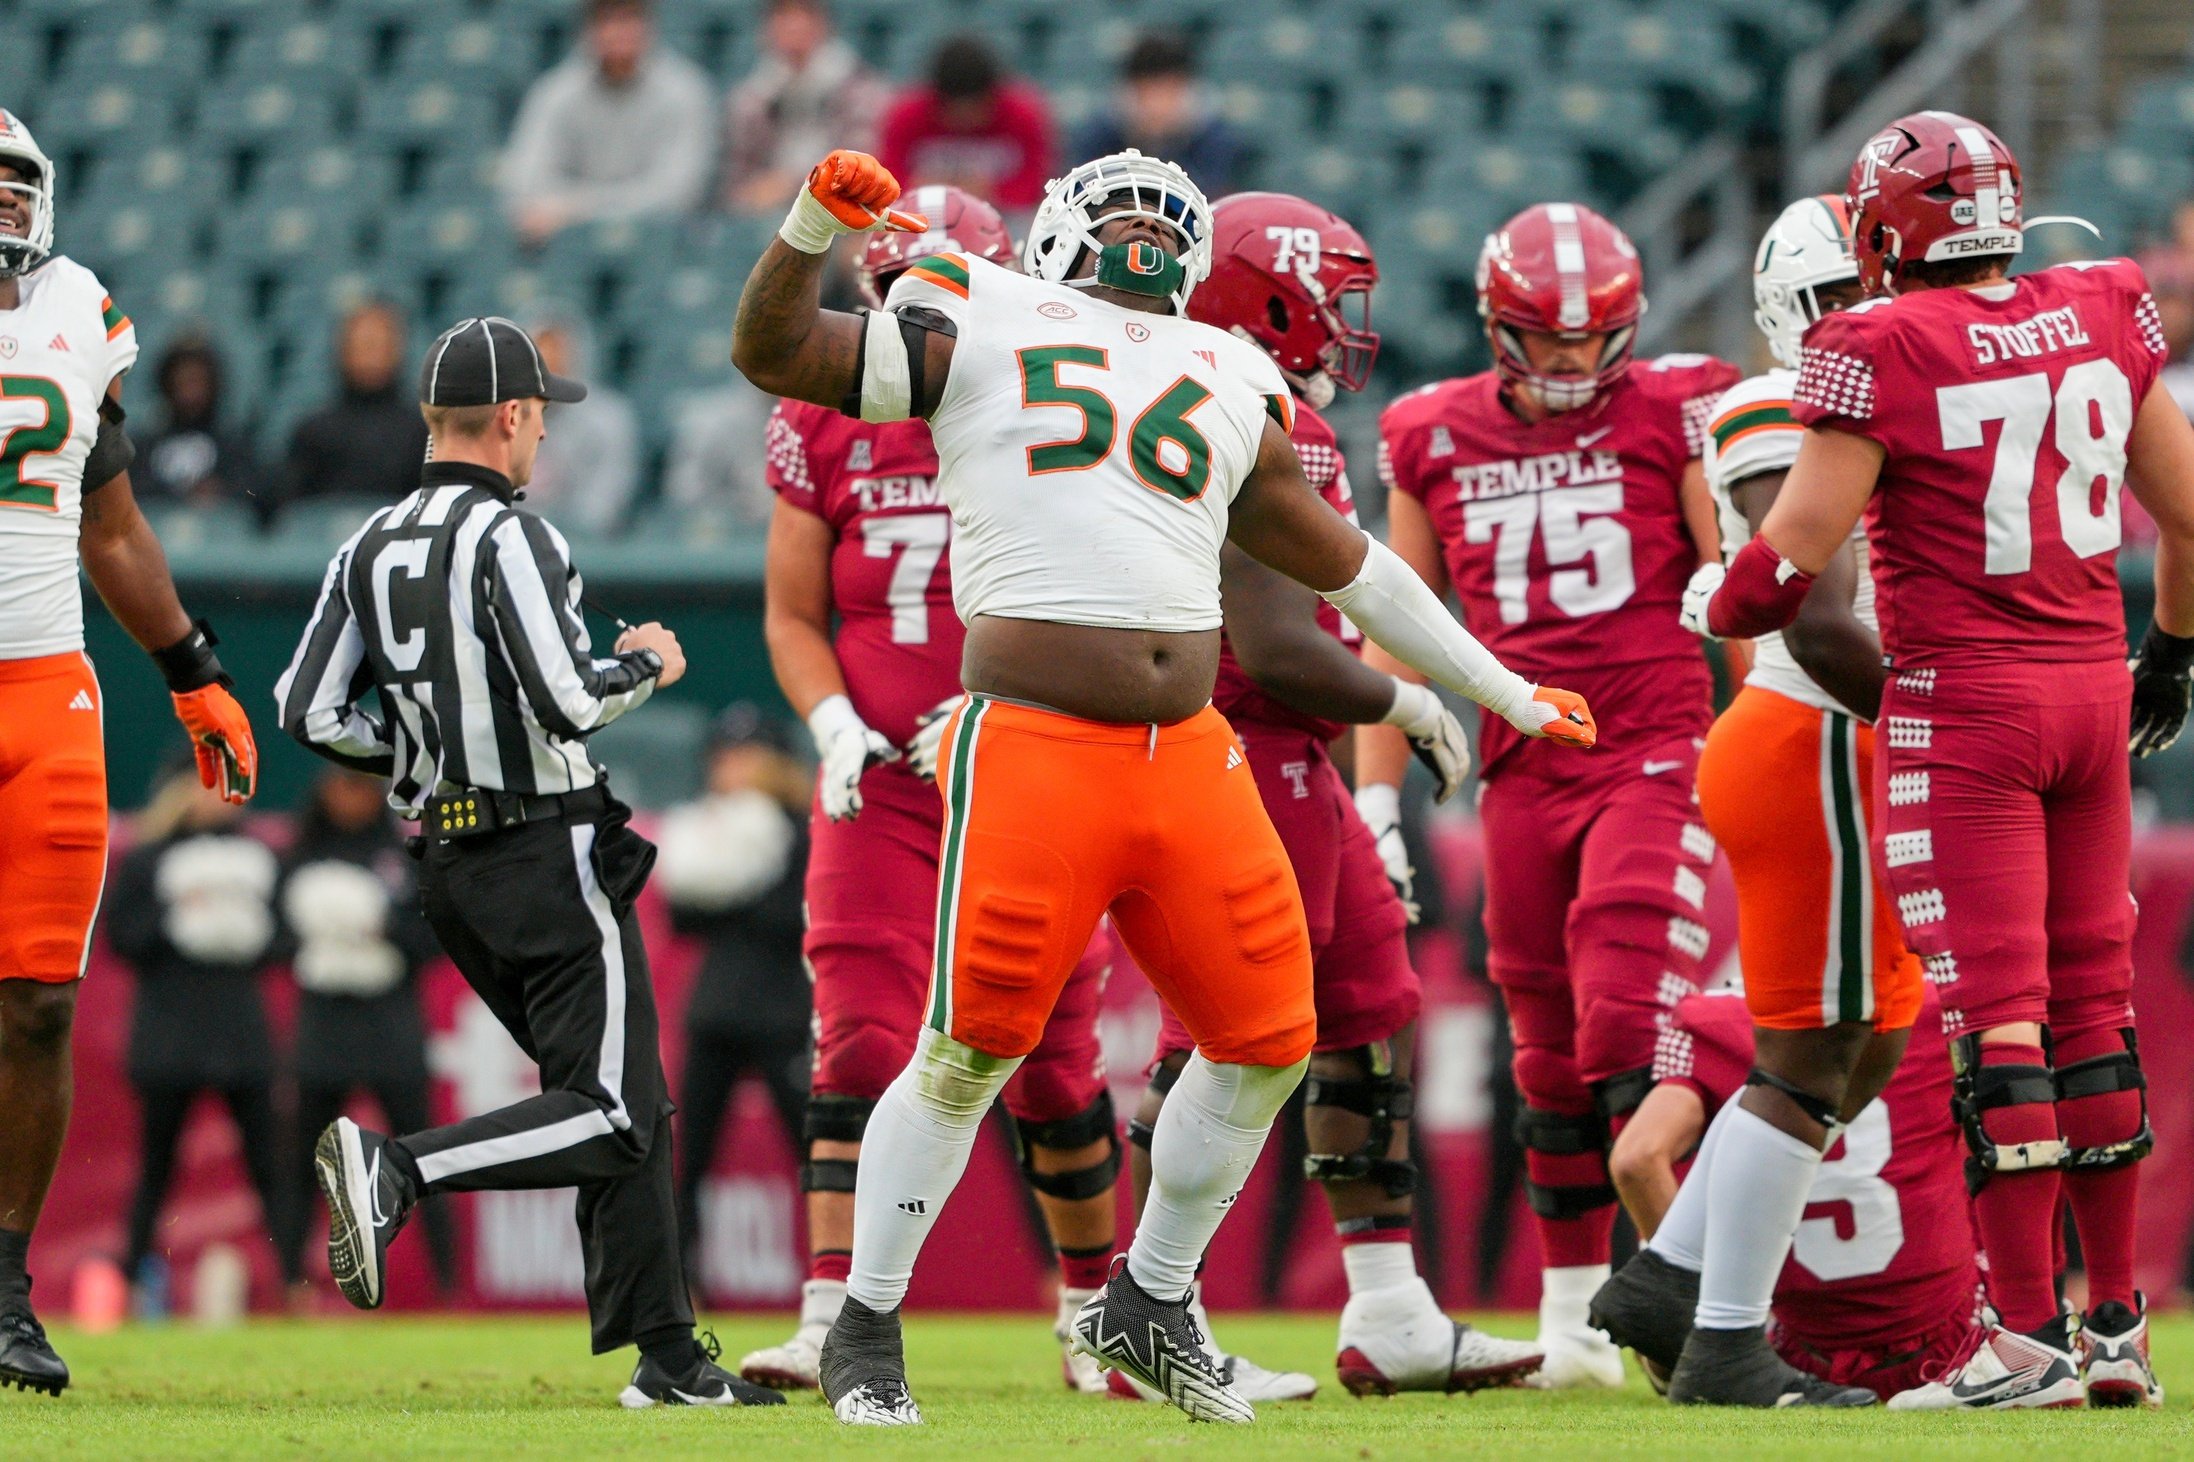 Miami Hurricanes defensive lineman Leonard Taylor III (56) celebrates his sack in the second half against the Temple Owls at Lincoln Financial Field.